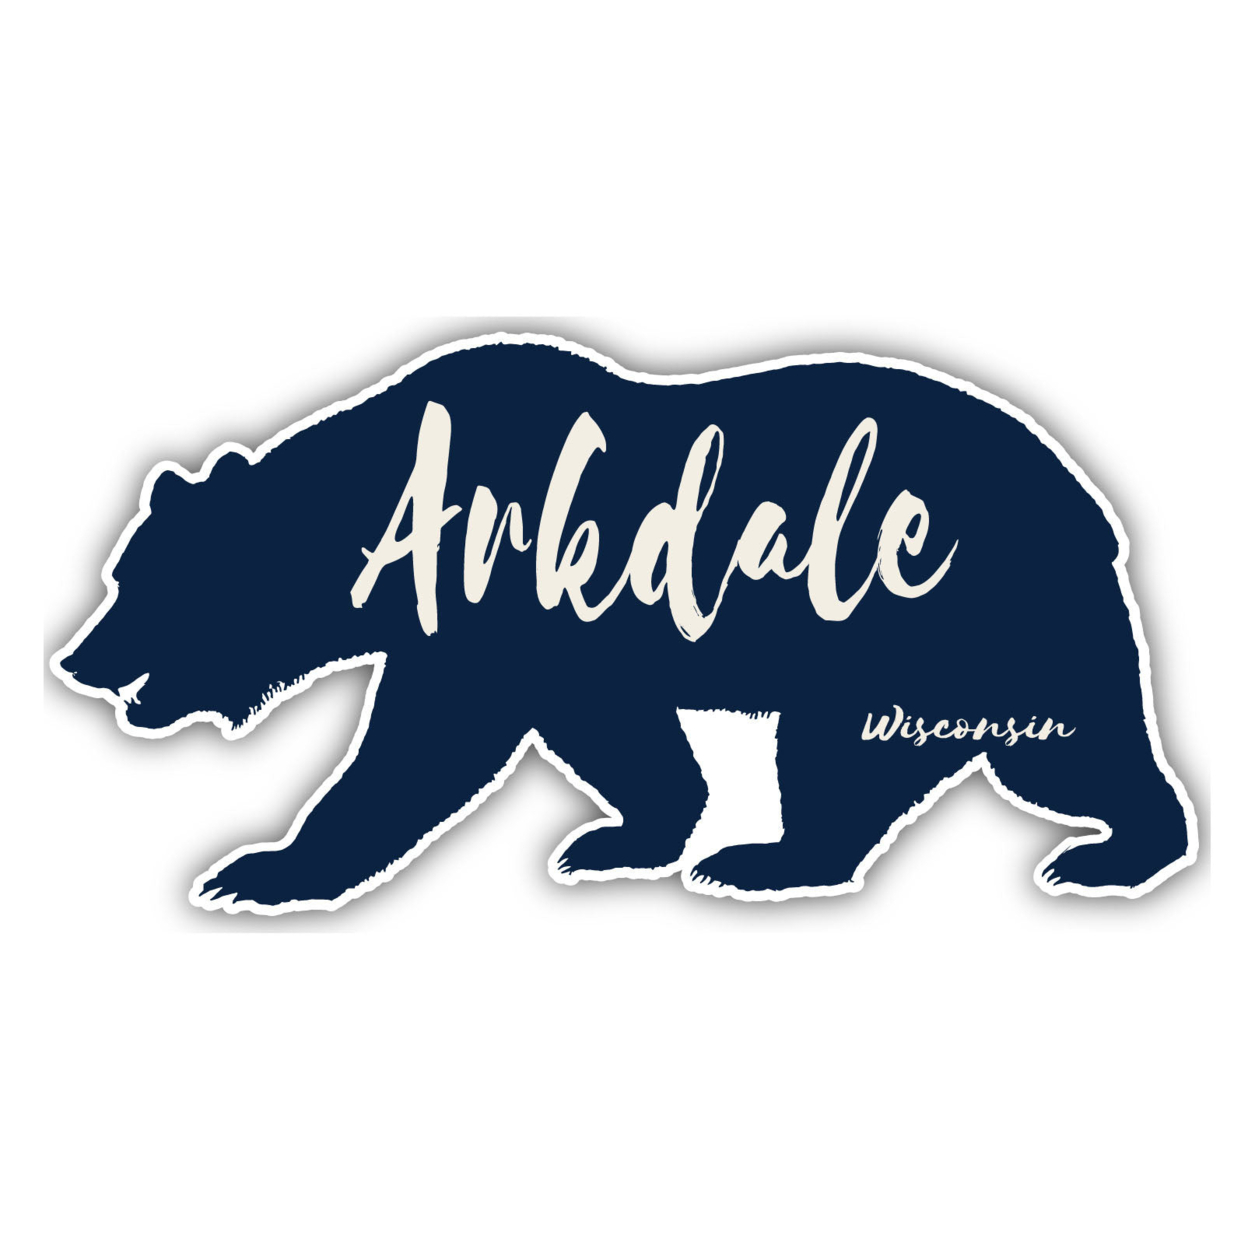 Arkdale Wisconsin Souvenir Decorative Stickers (Choose Theme And Size) - 4-Pack, 10-Inch, Tent